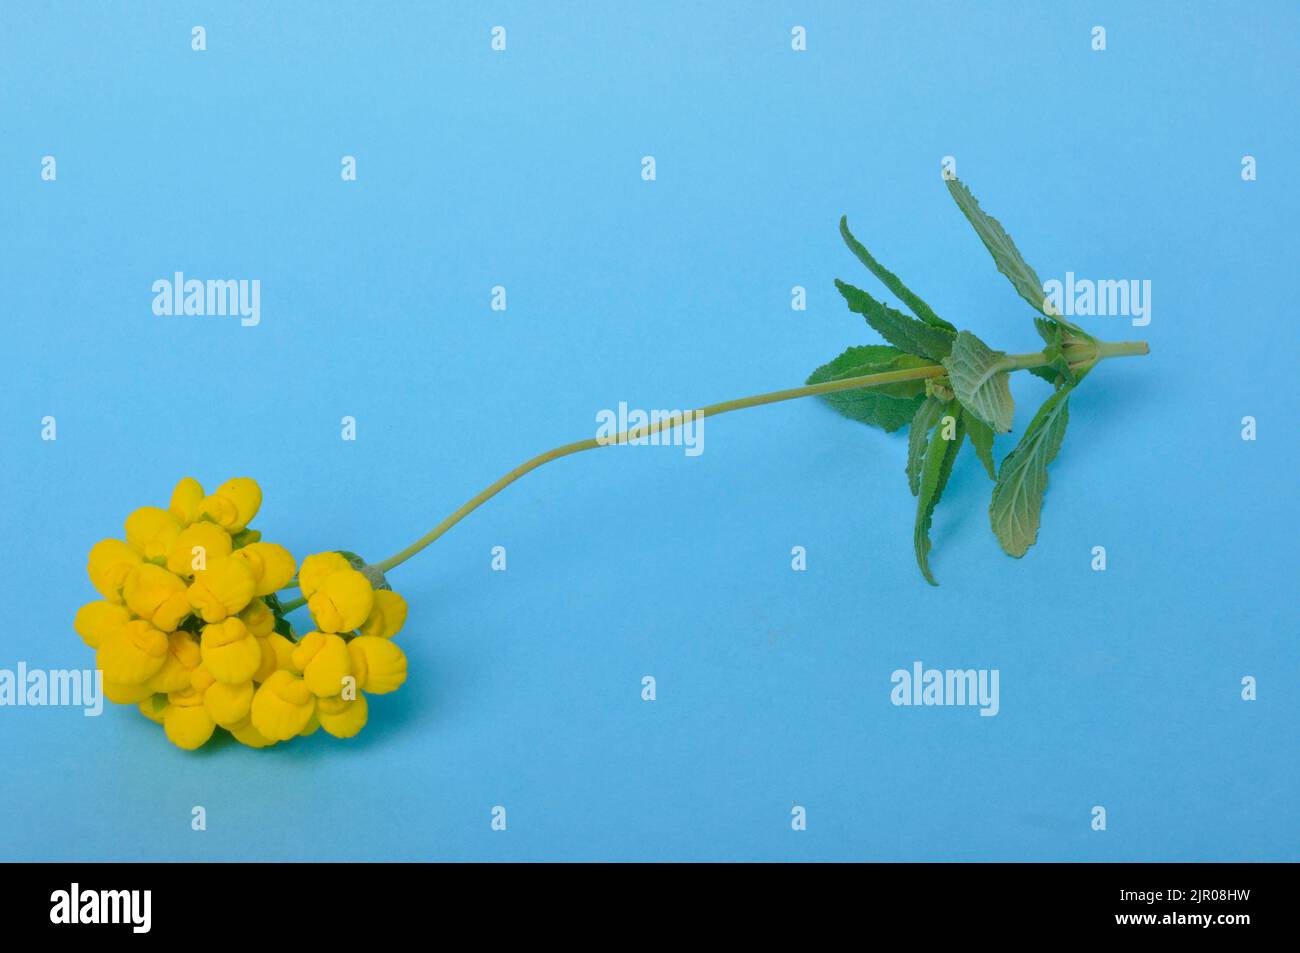 Calceolaria flowers on a blue background Stock Photo